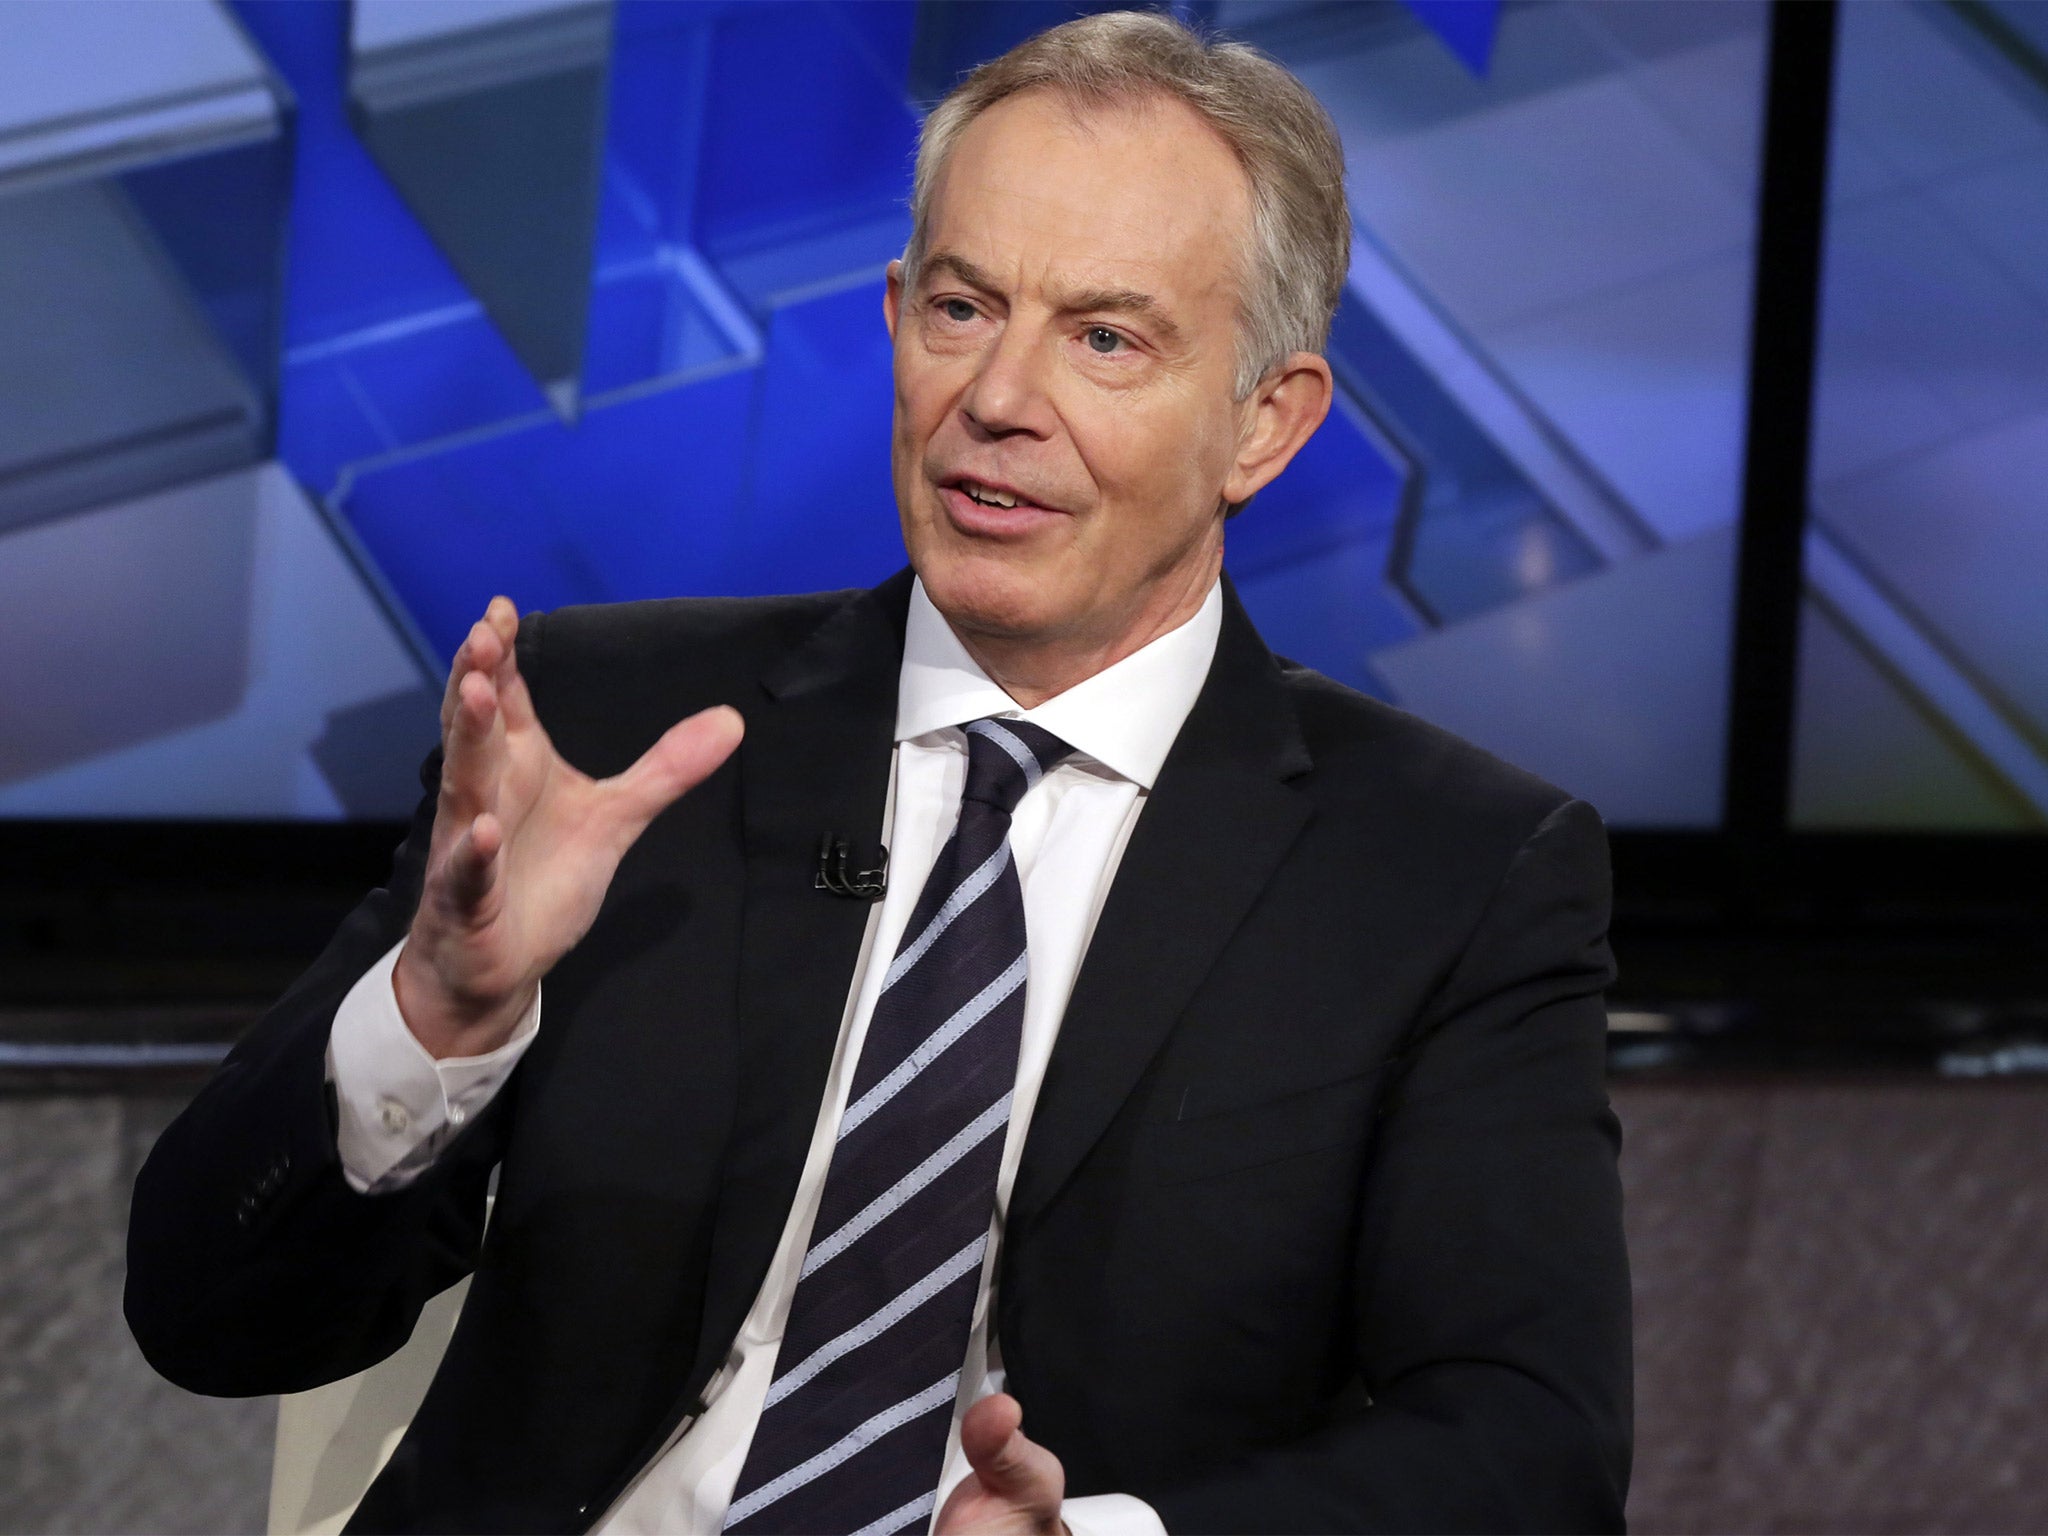 Tony Blair is interviewed by the Fox Business Network, in New York, on Wednesday